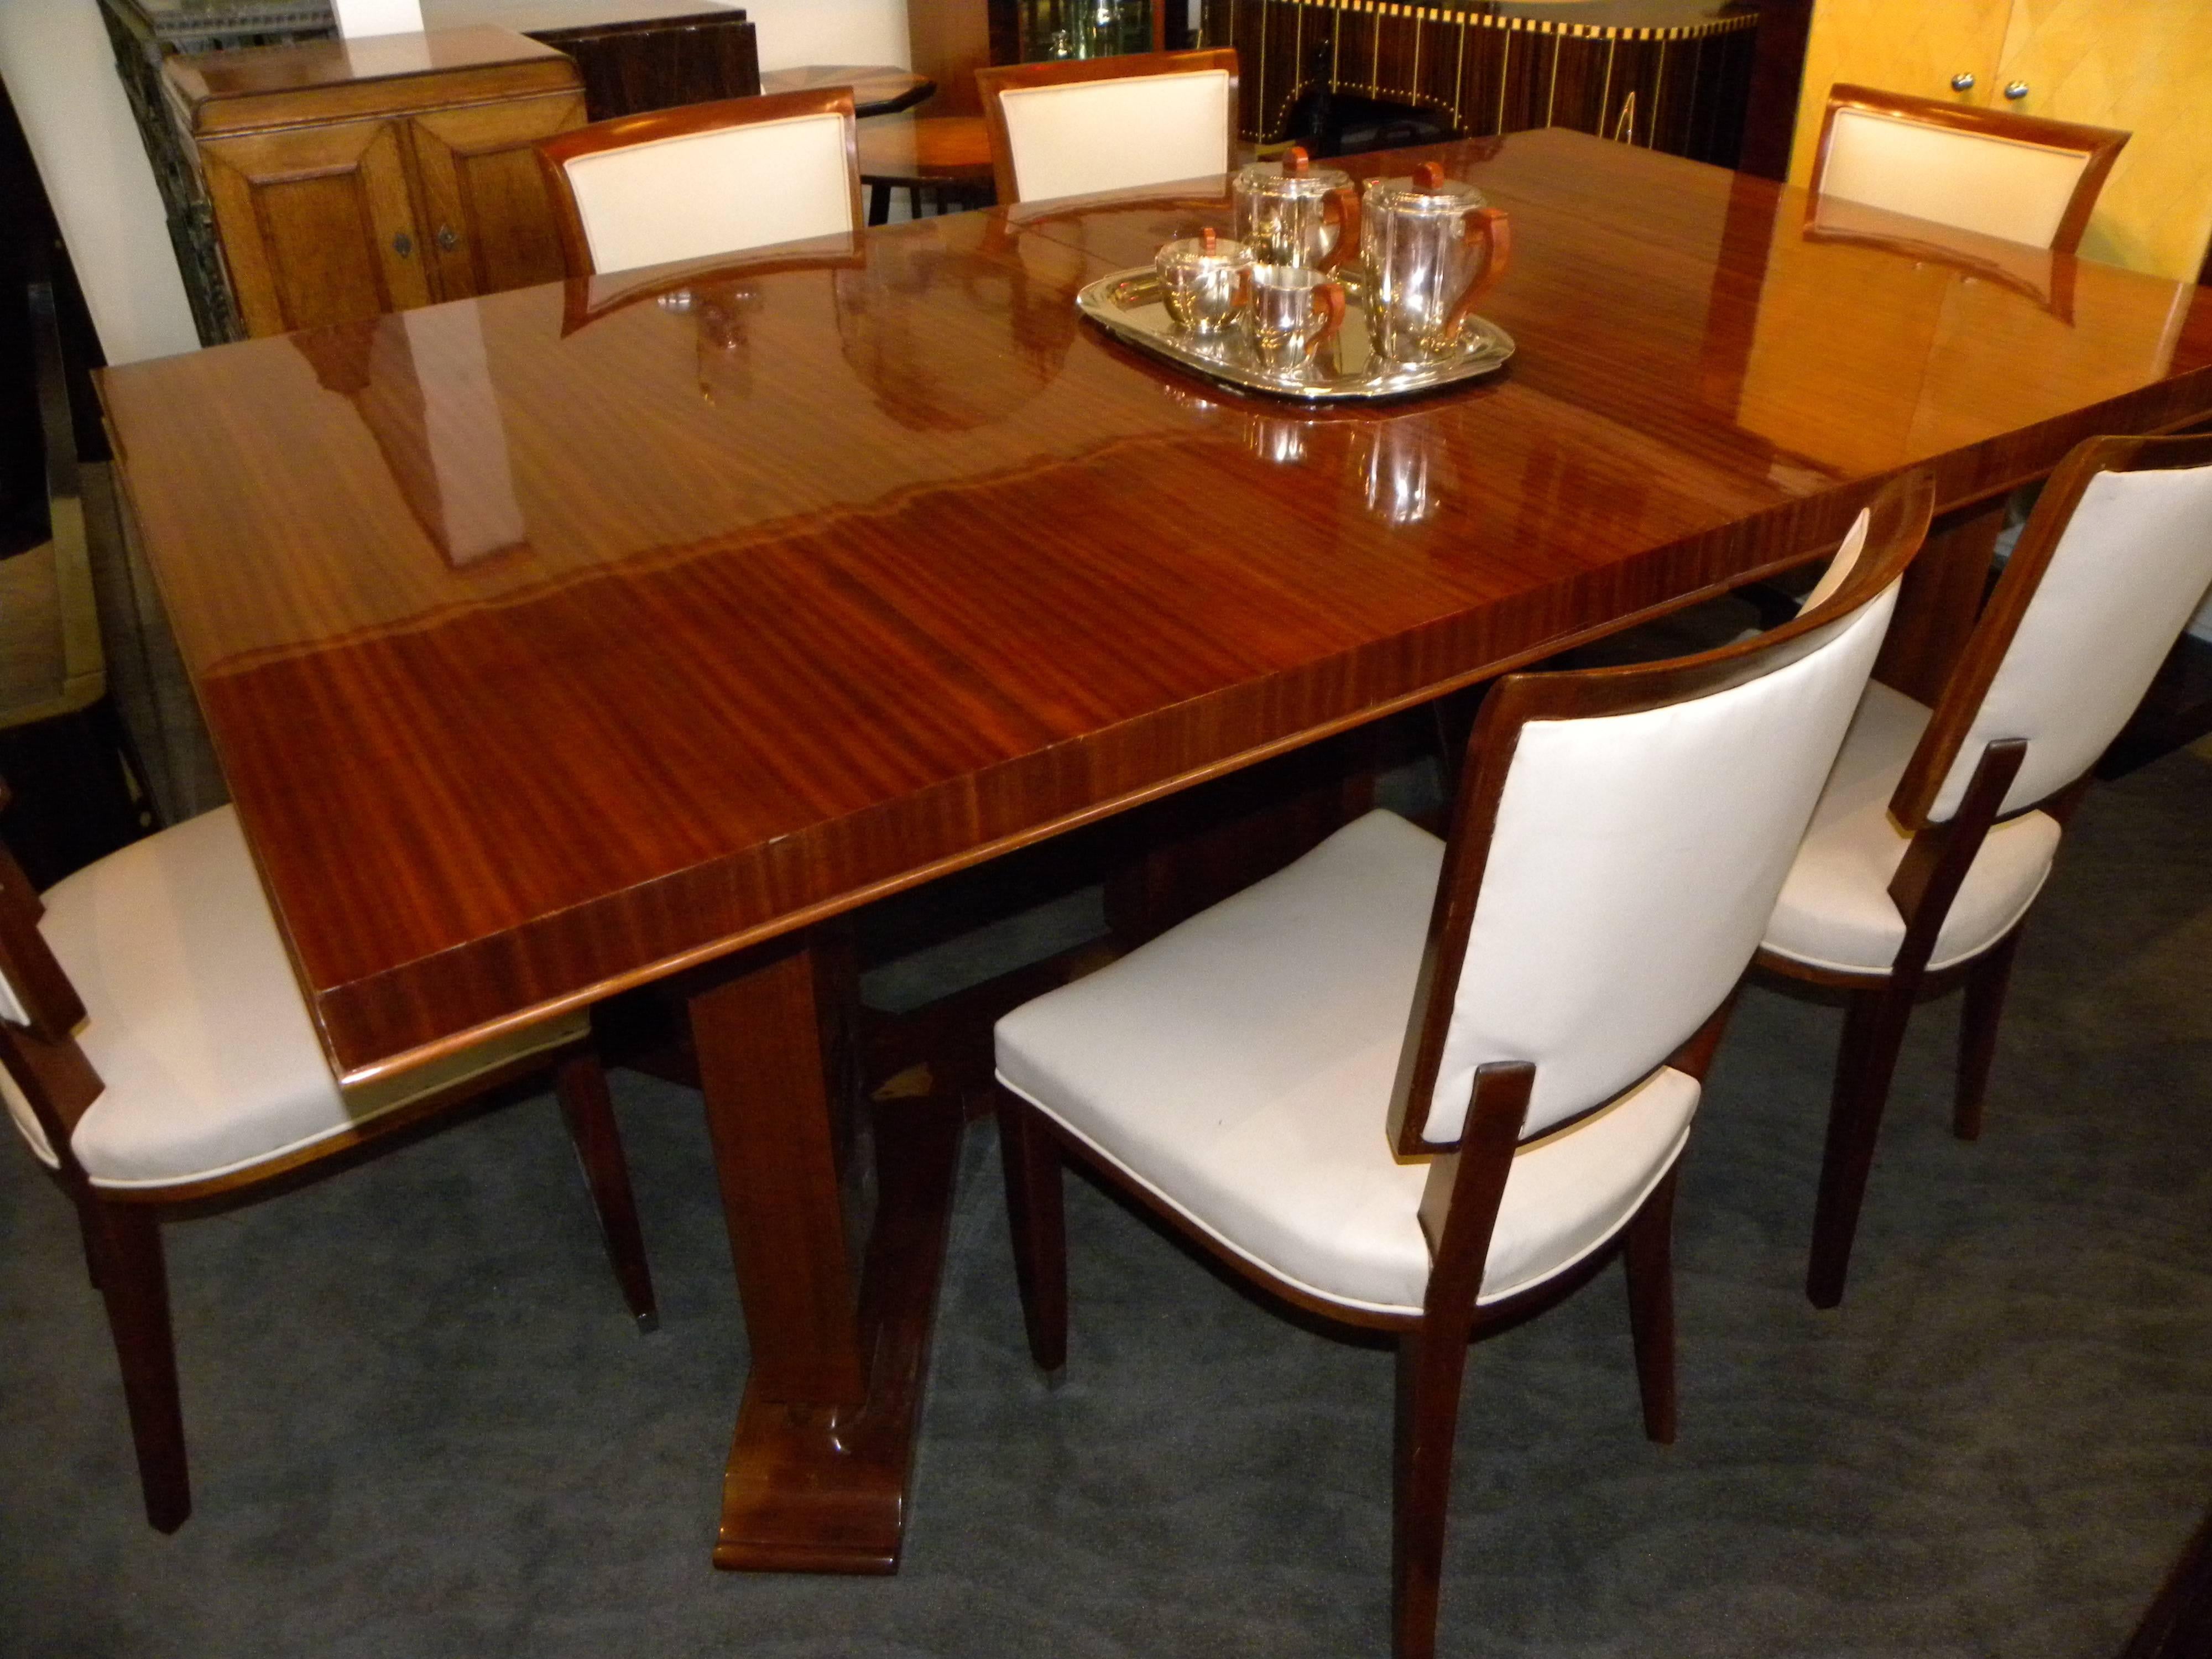 Jules Leleu created this spectacular Art Deco dining room table and chairs. Leleu was one of the most important and prolific names in furnishings of this period. What gives this particular table and chairs even more significance is the fact that